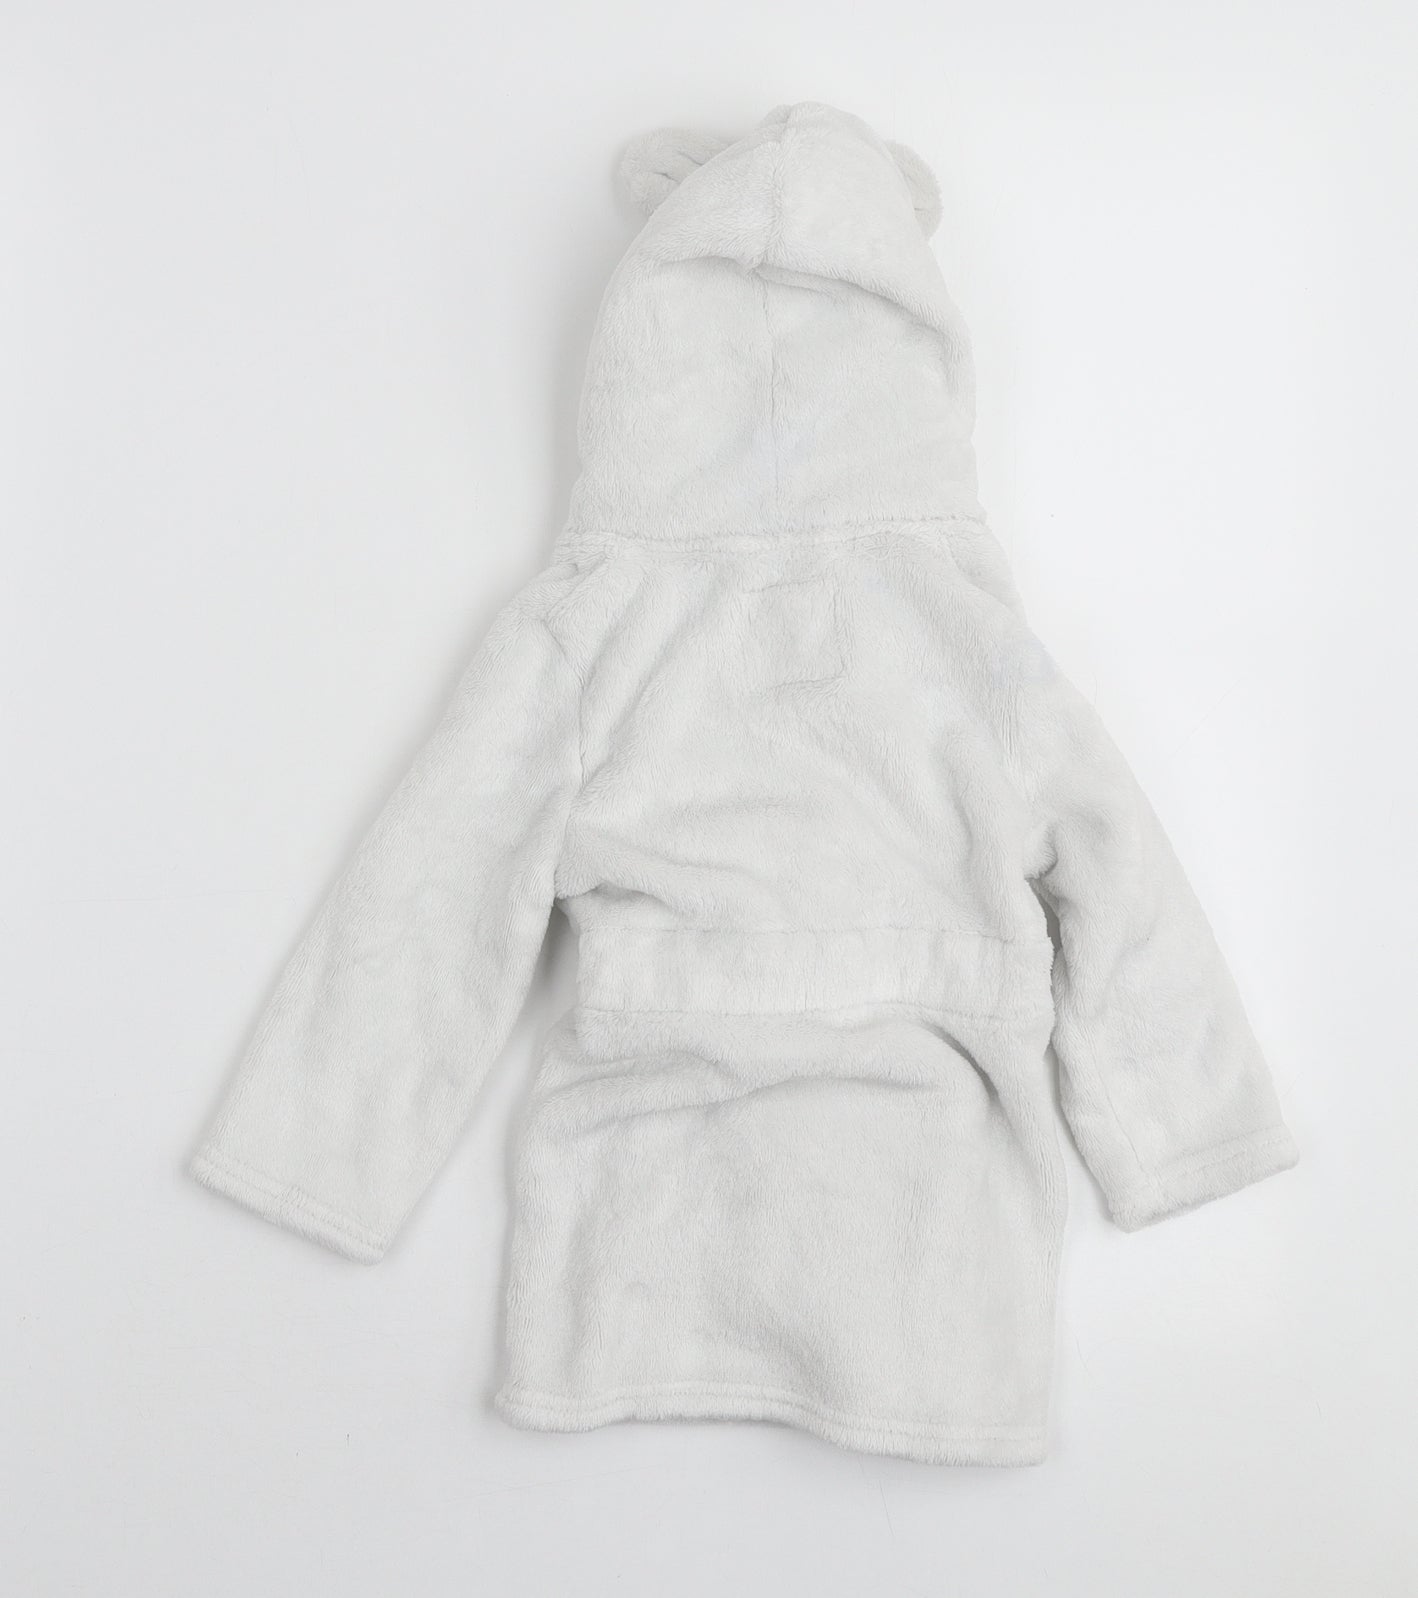 F&F Girls White Solid Polyester Robe Size 9-12 Months Tie - Bear Ear Hood